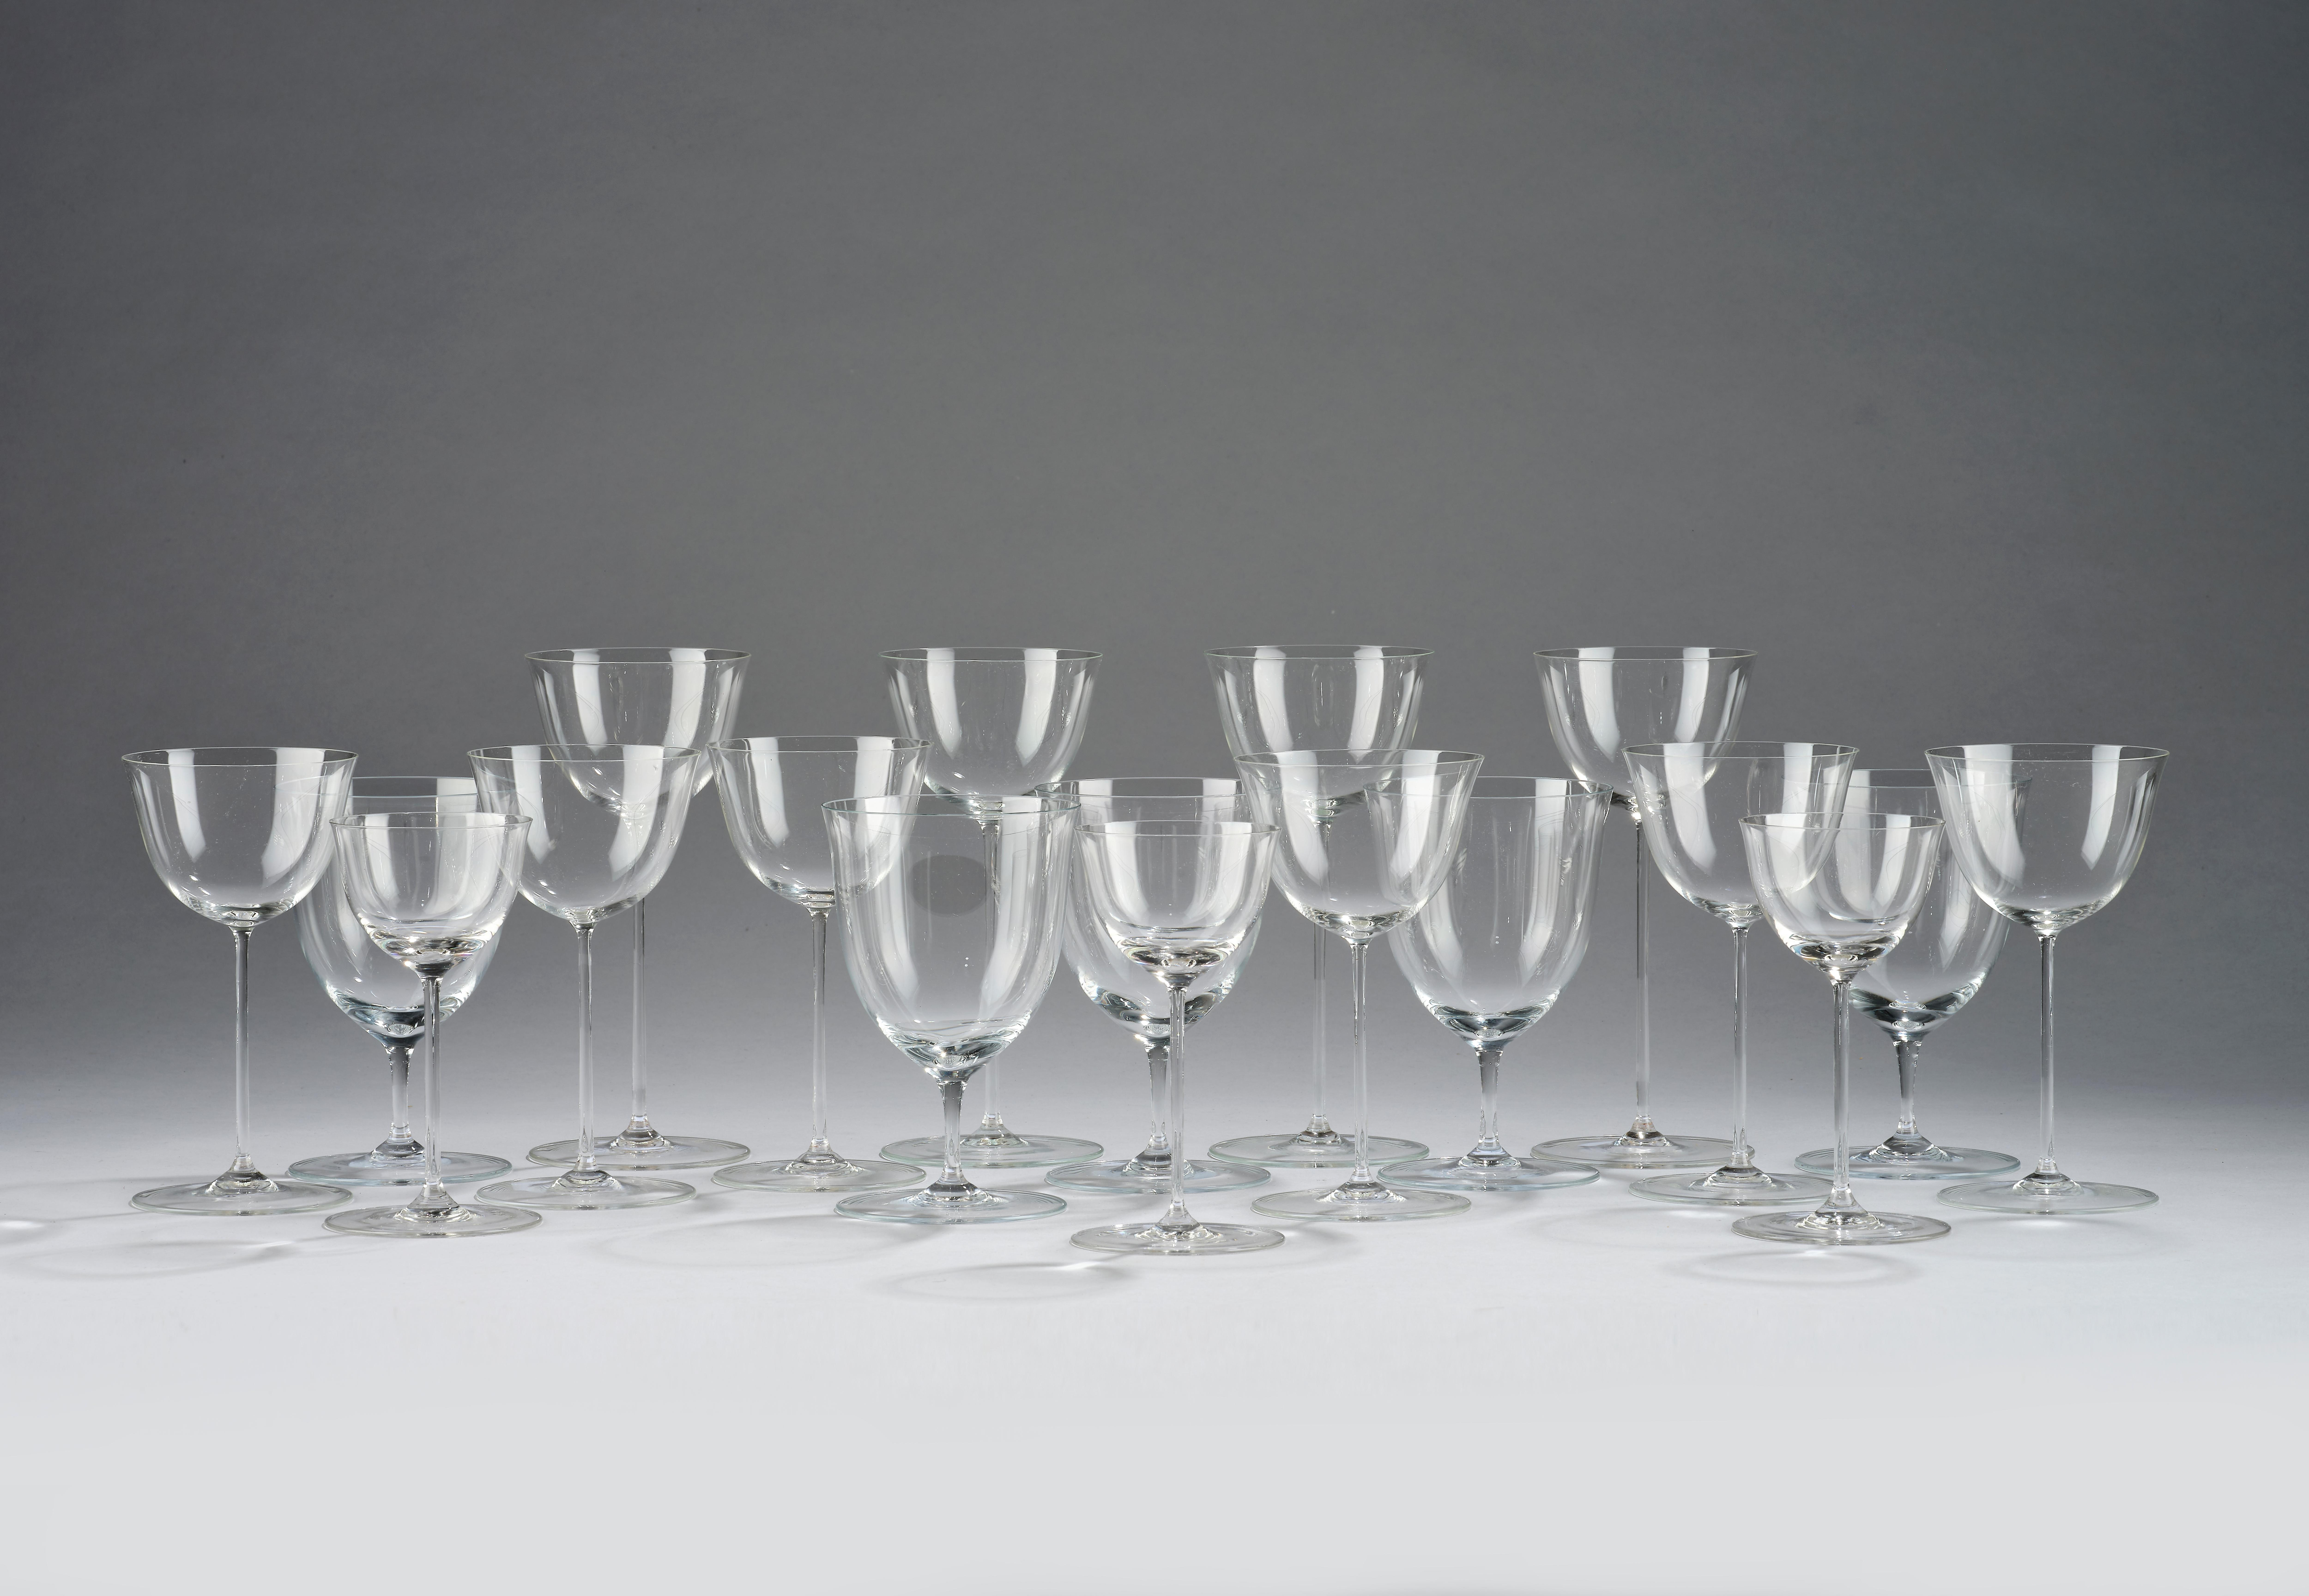 Patrician Drinking Set No. 238 Tall Champagne Flute by Josef